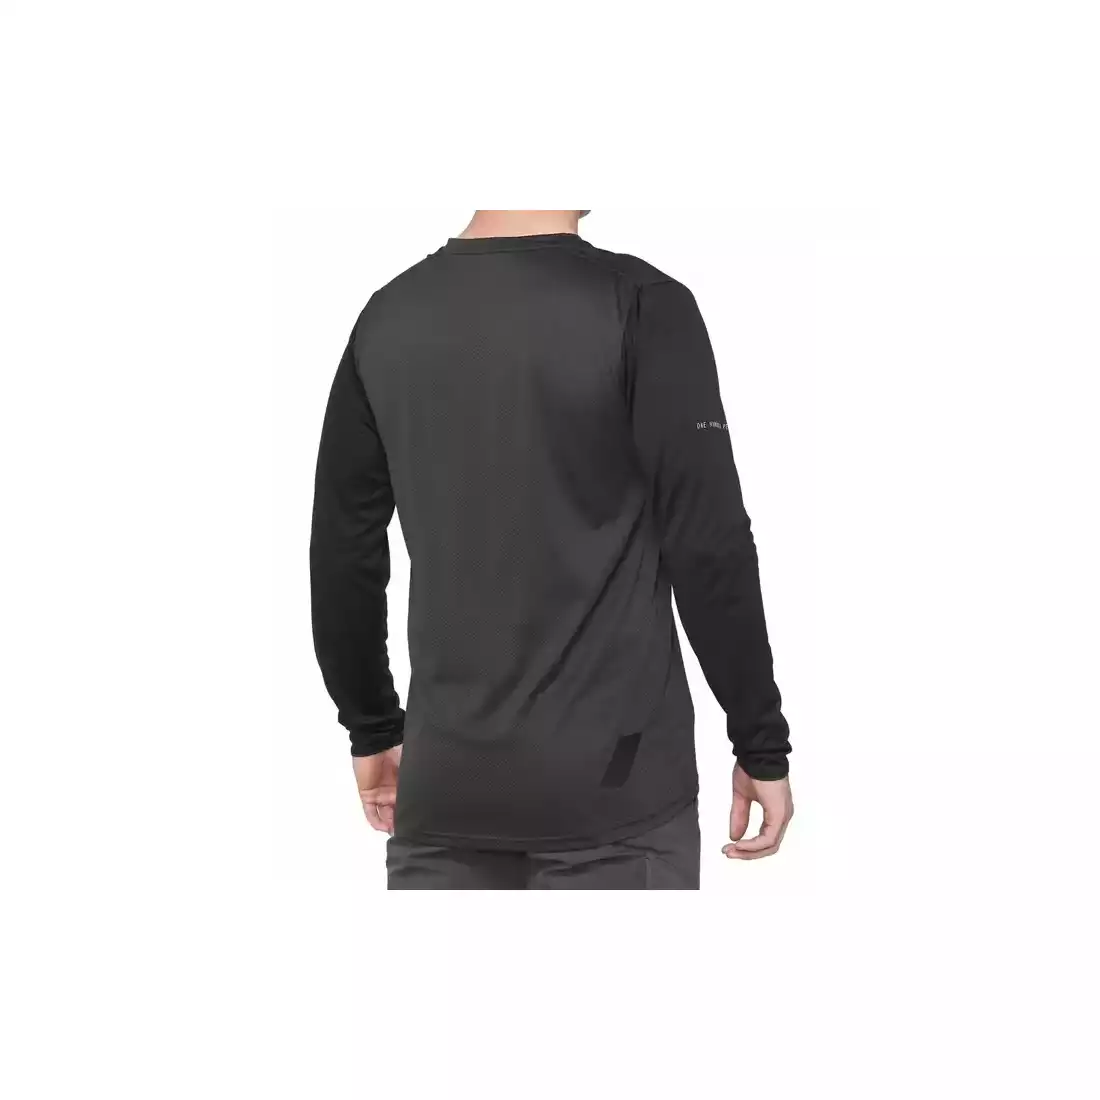 100% RIDECAMP men's long sleeve cycling jersey, black charcoal 